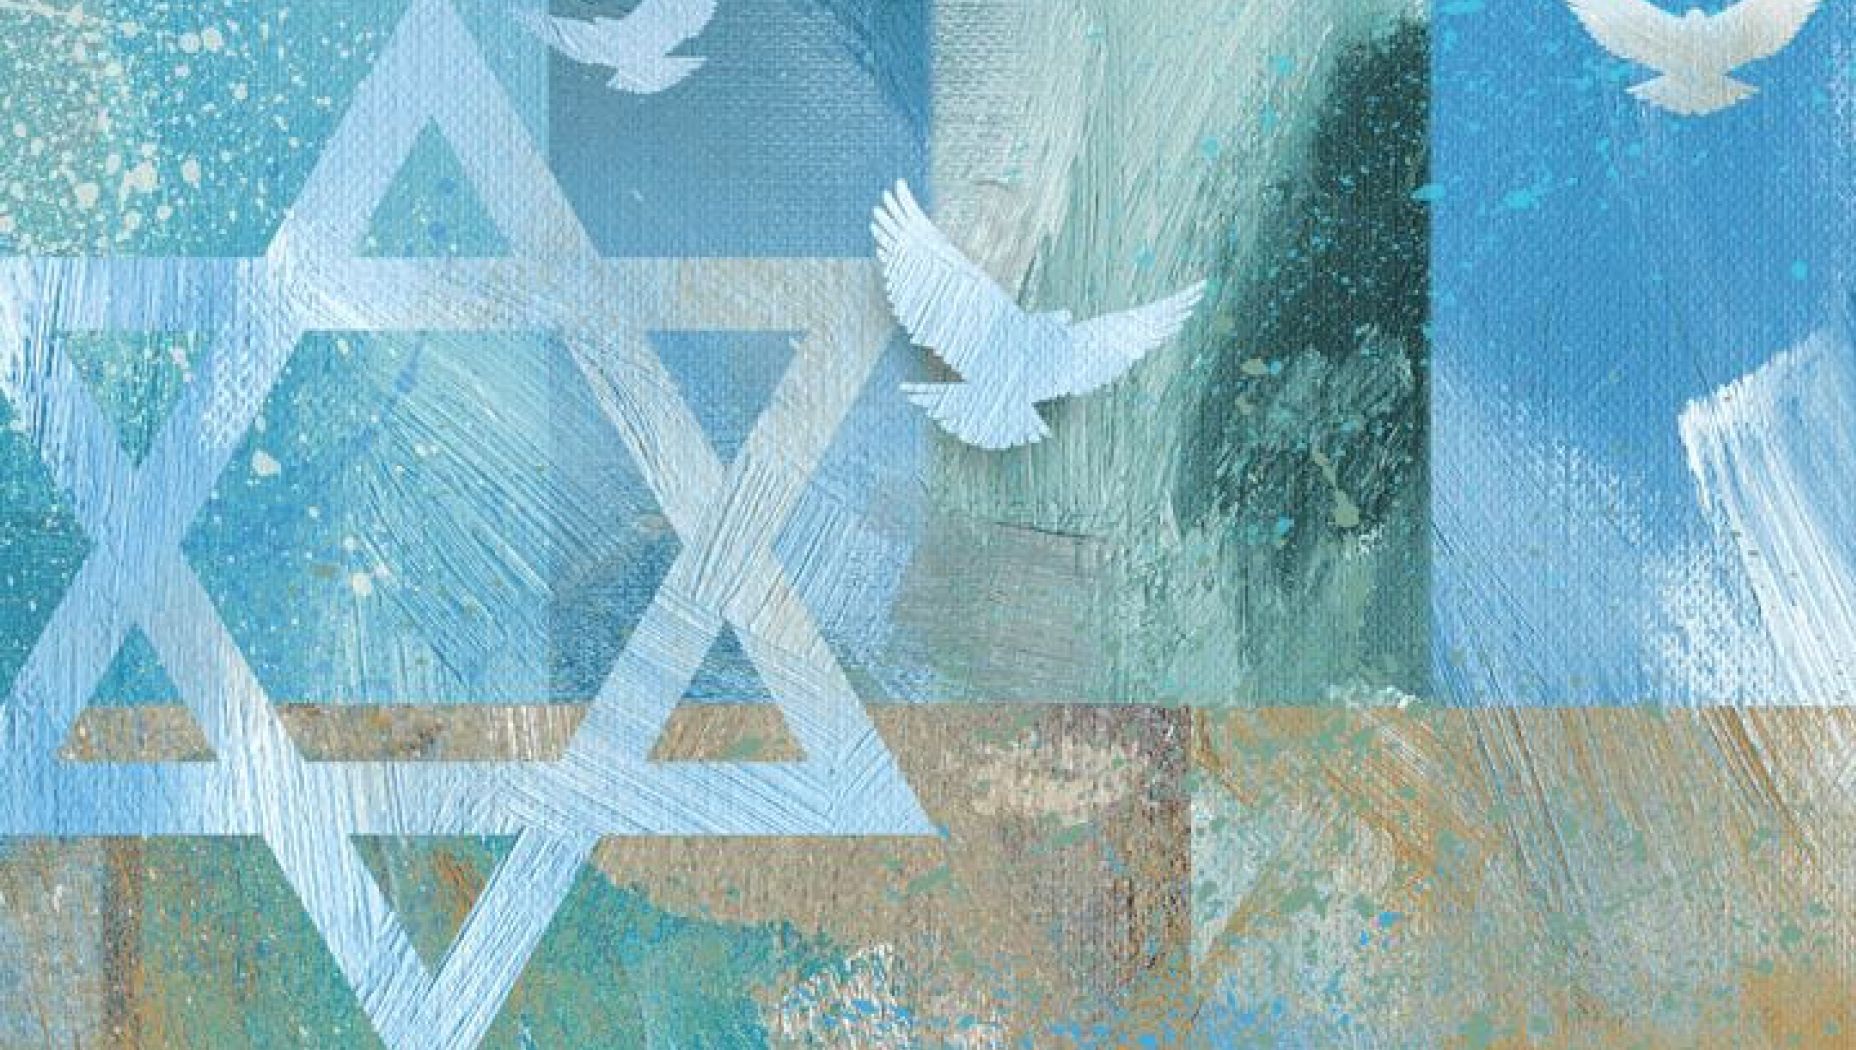 A graphic of the Jewish Star of David with birds flying around